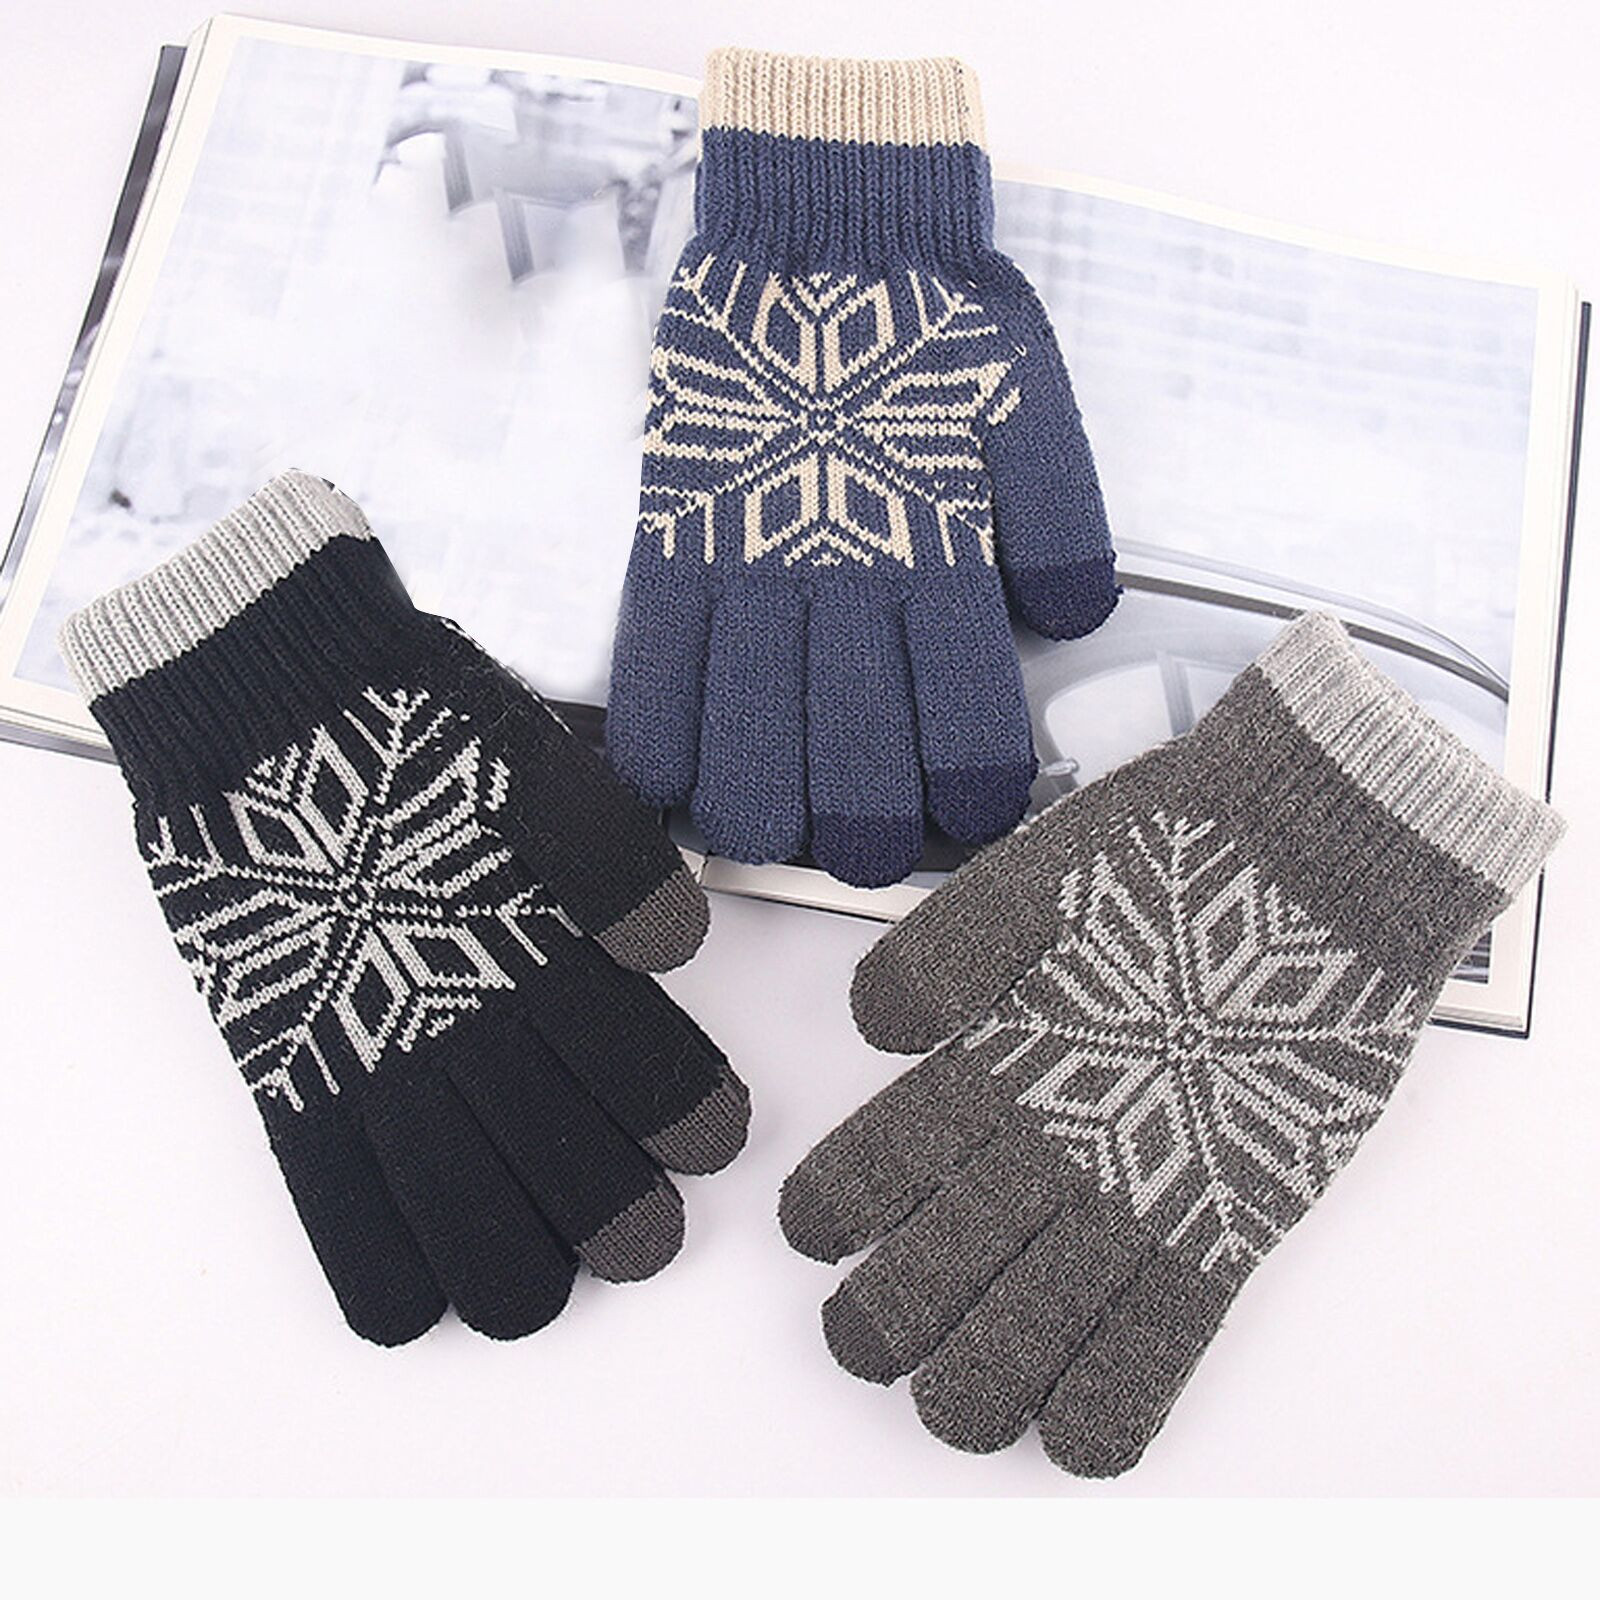 Gloves Men's Fall And Winter Thickened Knitted Warm Woolen Gloves Mittens Motocycle Slip-resistant Carbon Korean version Gloves